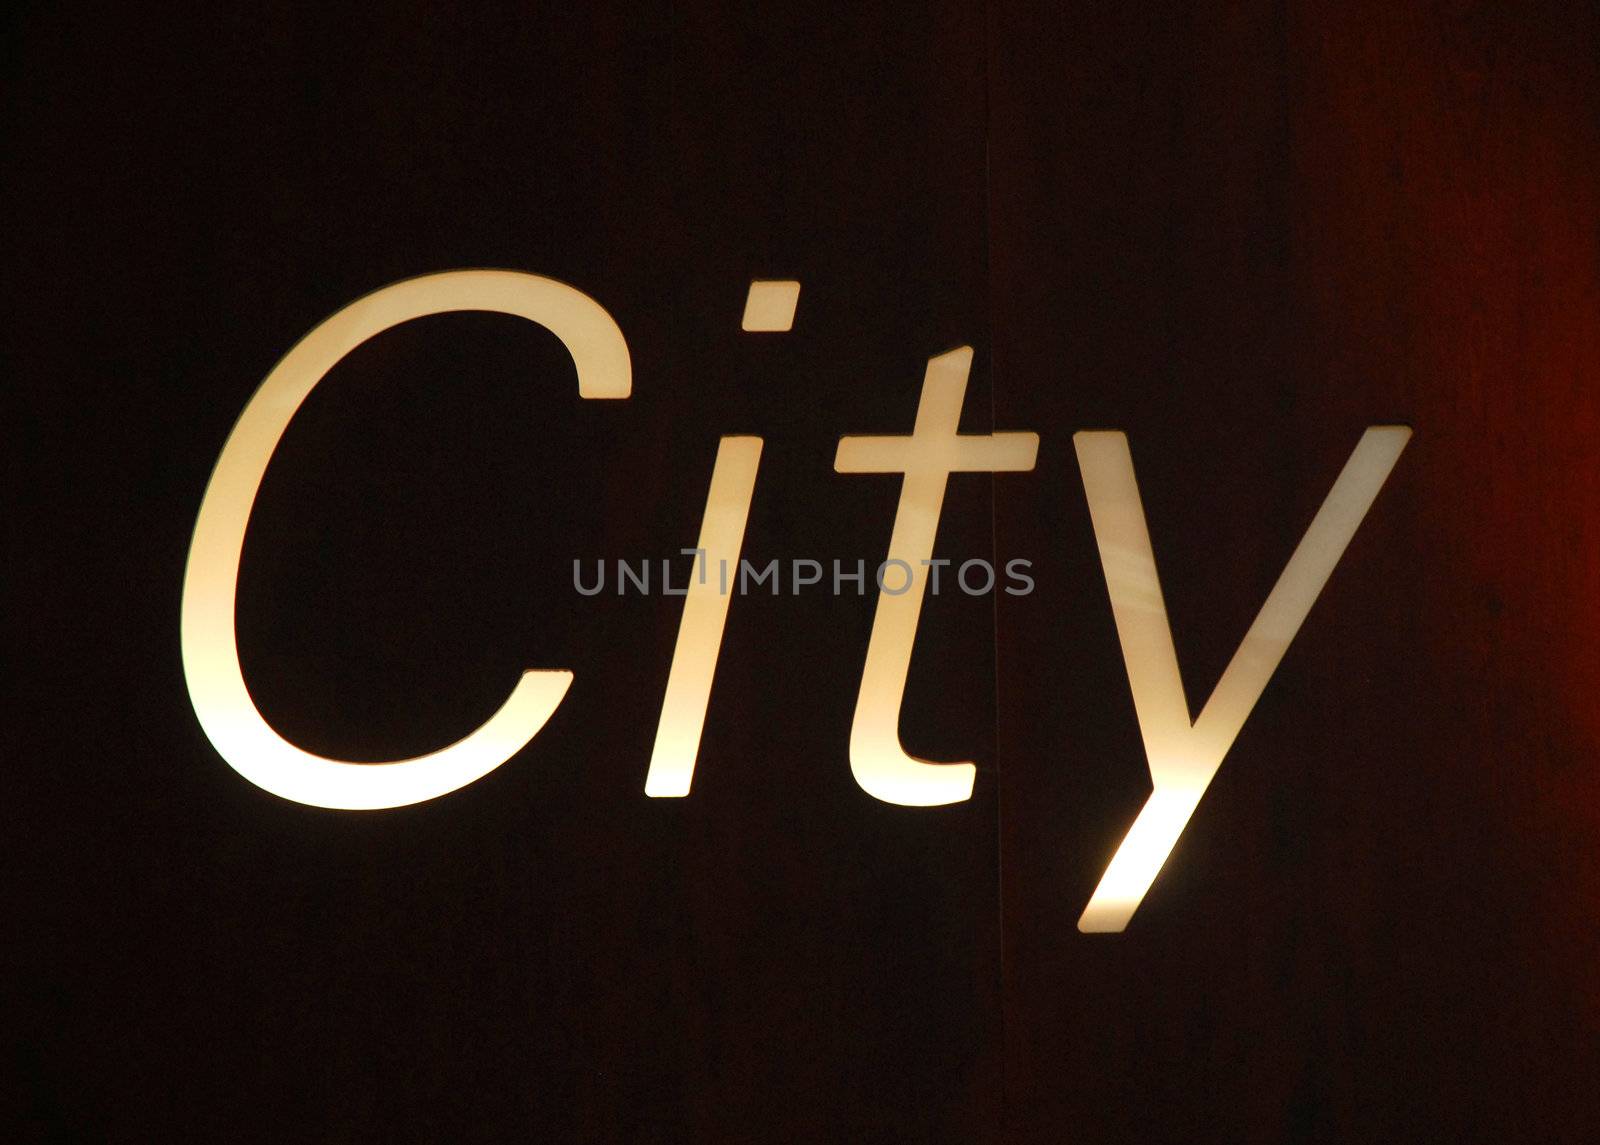 Billboard written with the word City  by cienpies